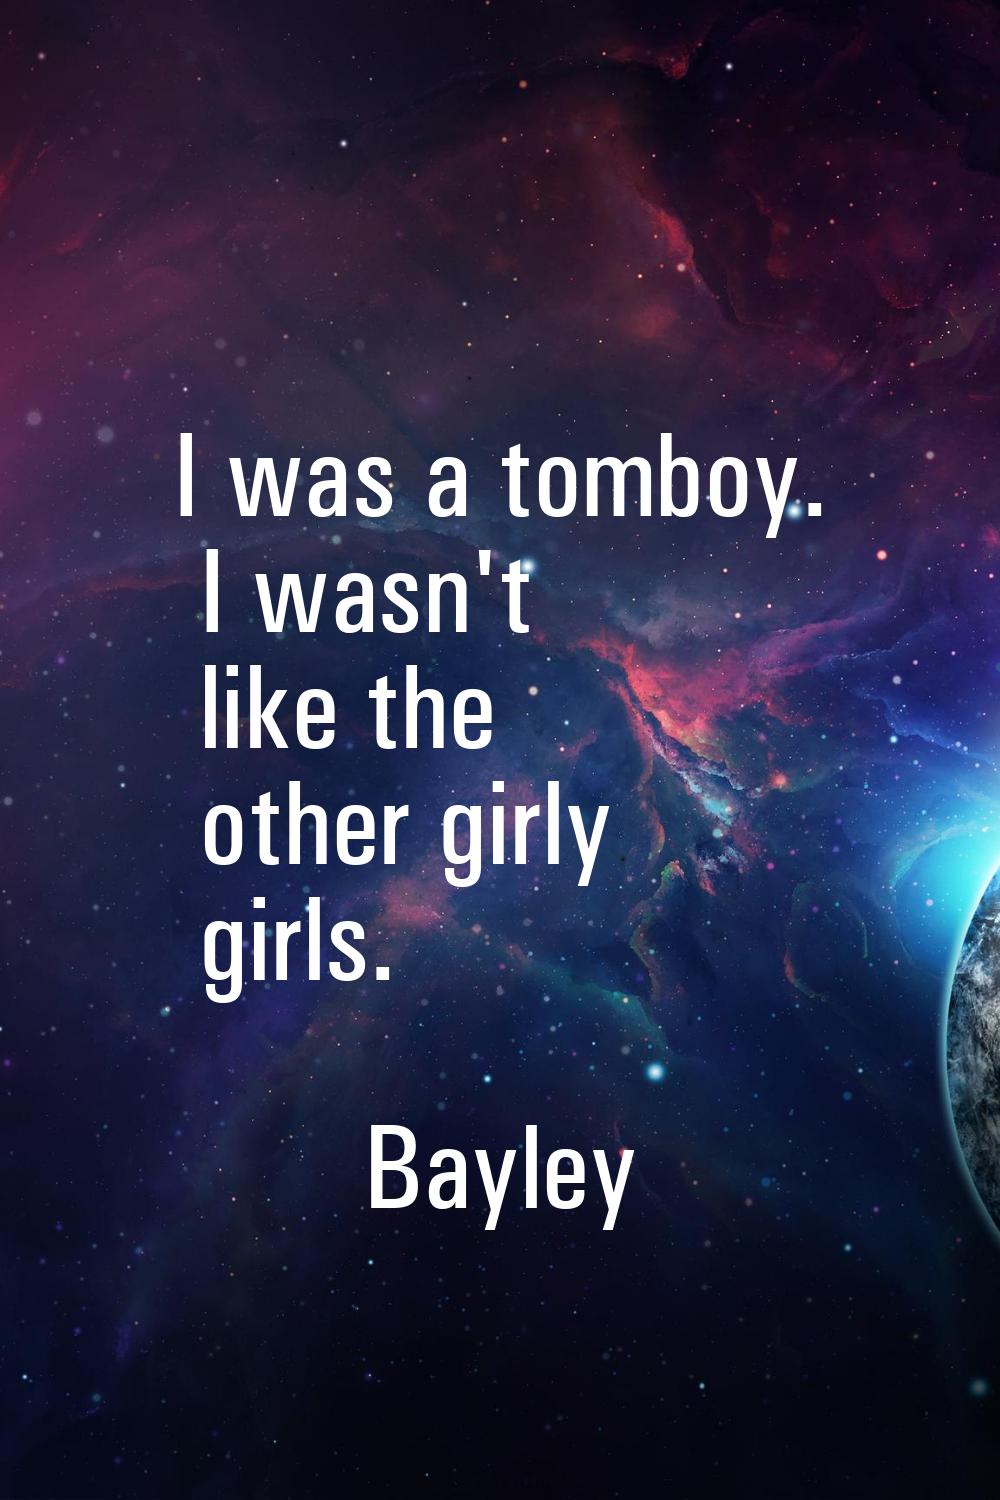 I was a tomboy. I wasn't like the other girly girls.